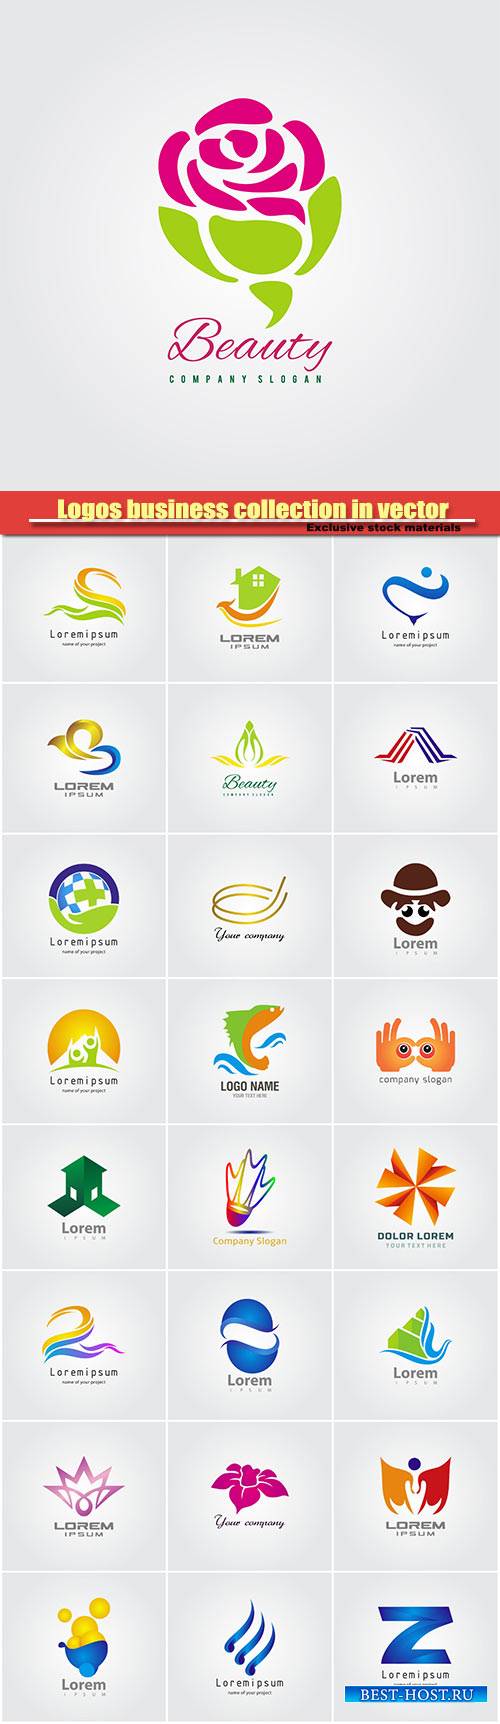 Logos business collection in vector #26